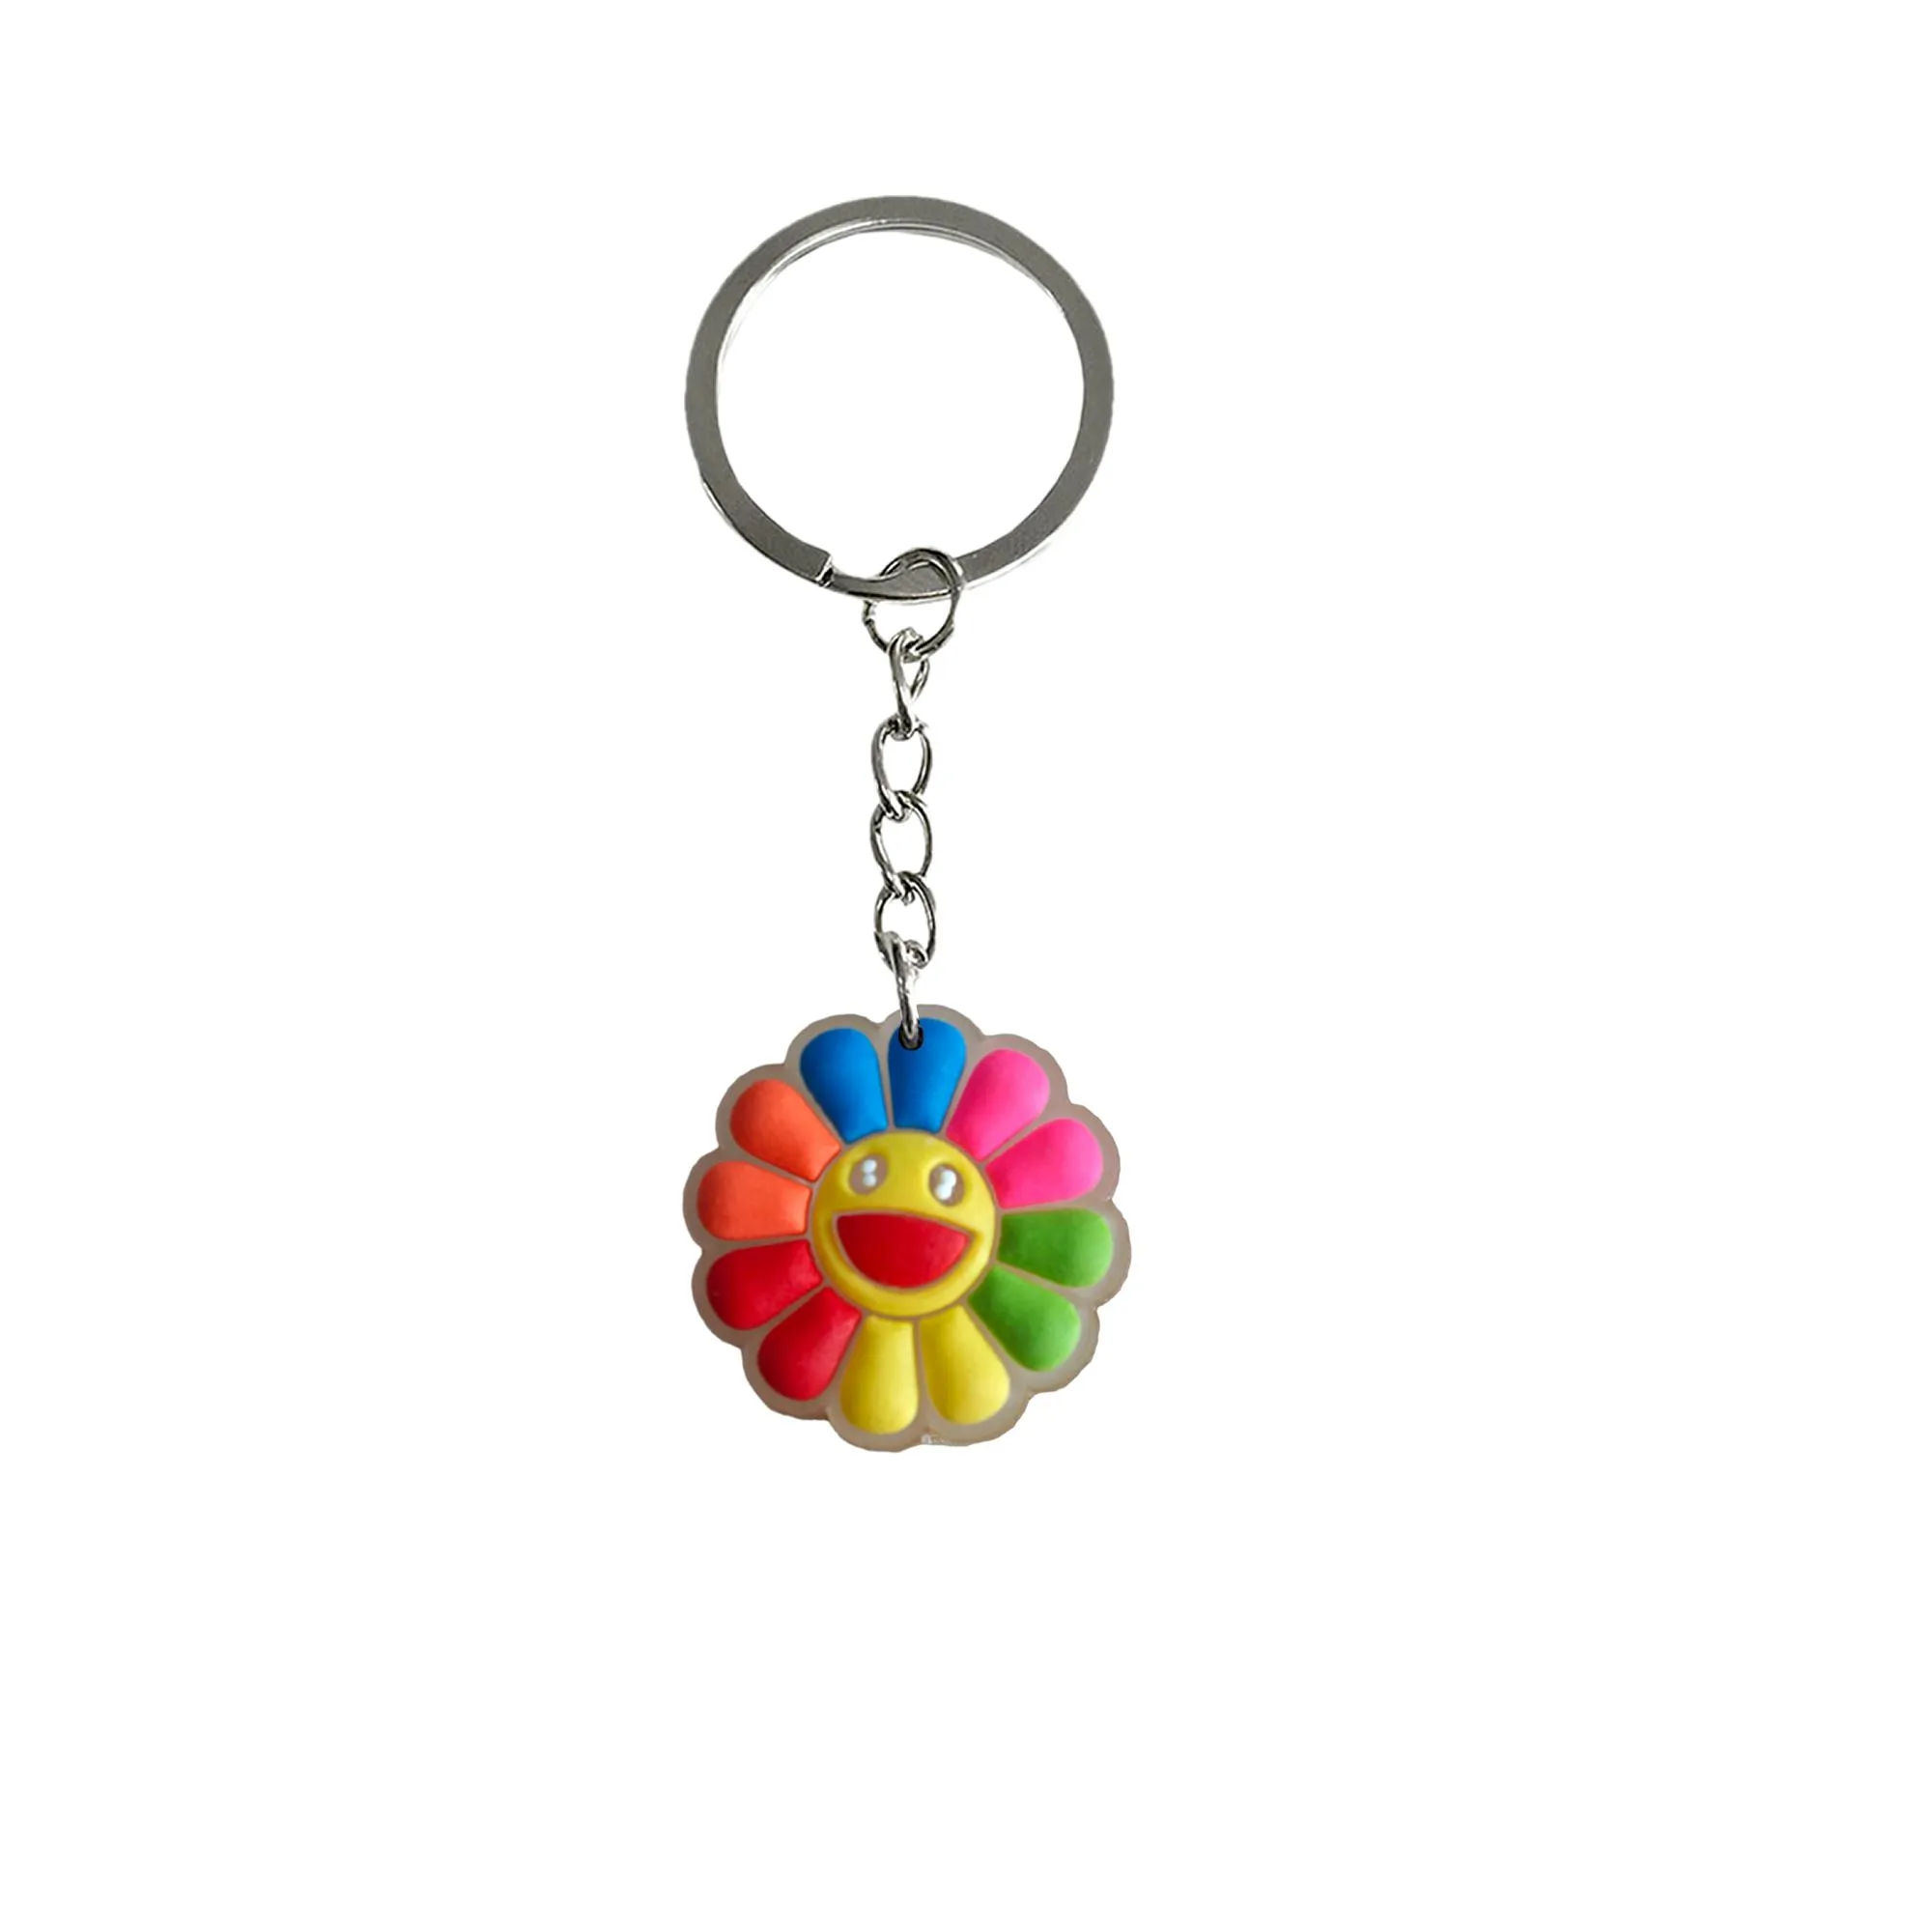 fluorescent rainbow flower keychain keychains backpack key purse handbag charms for women childrens party favors keyring suitable schoolbag ring men